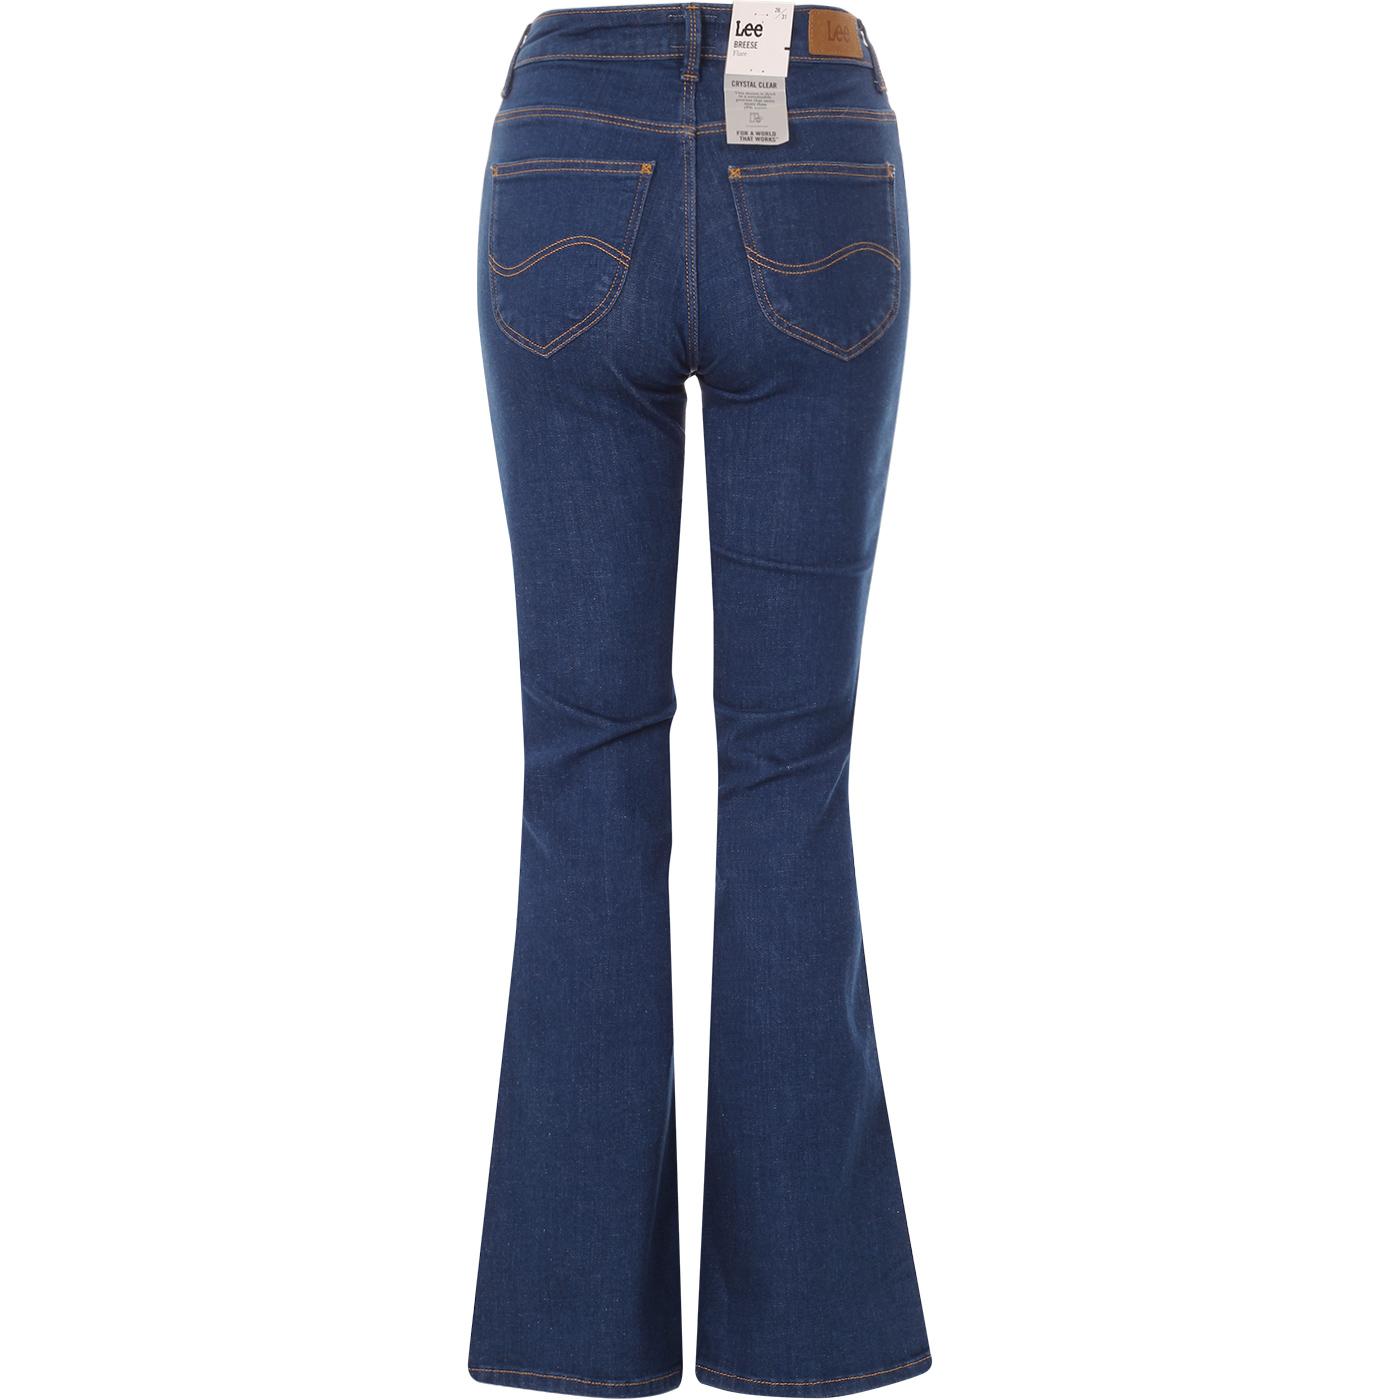 Breese LEE Retro 1970s Flared Jeans in Vintage Ayla